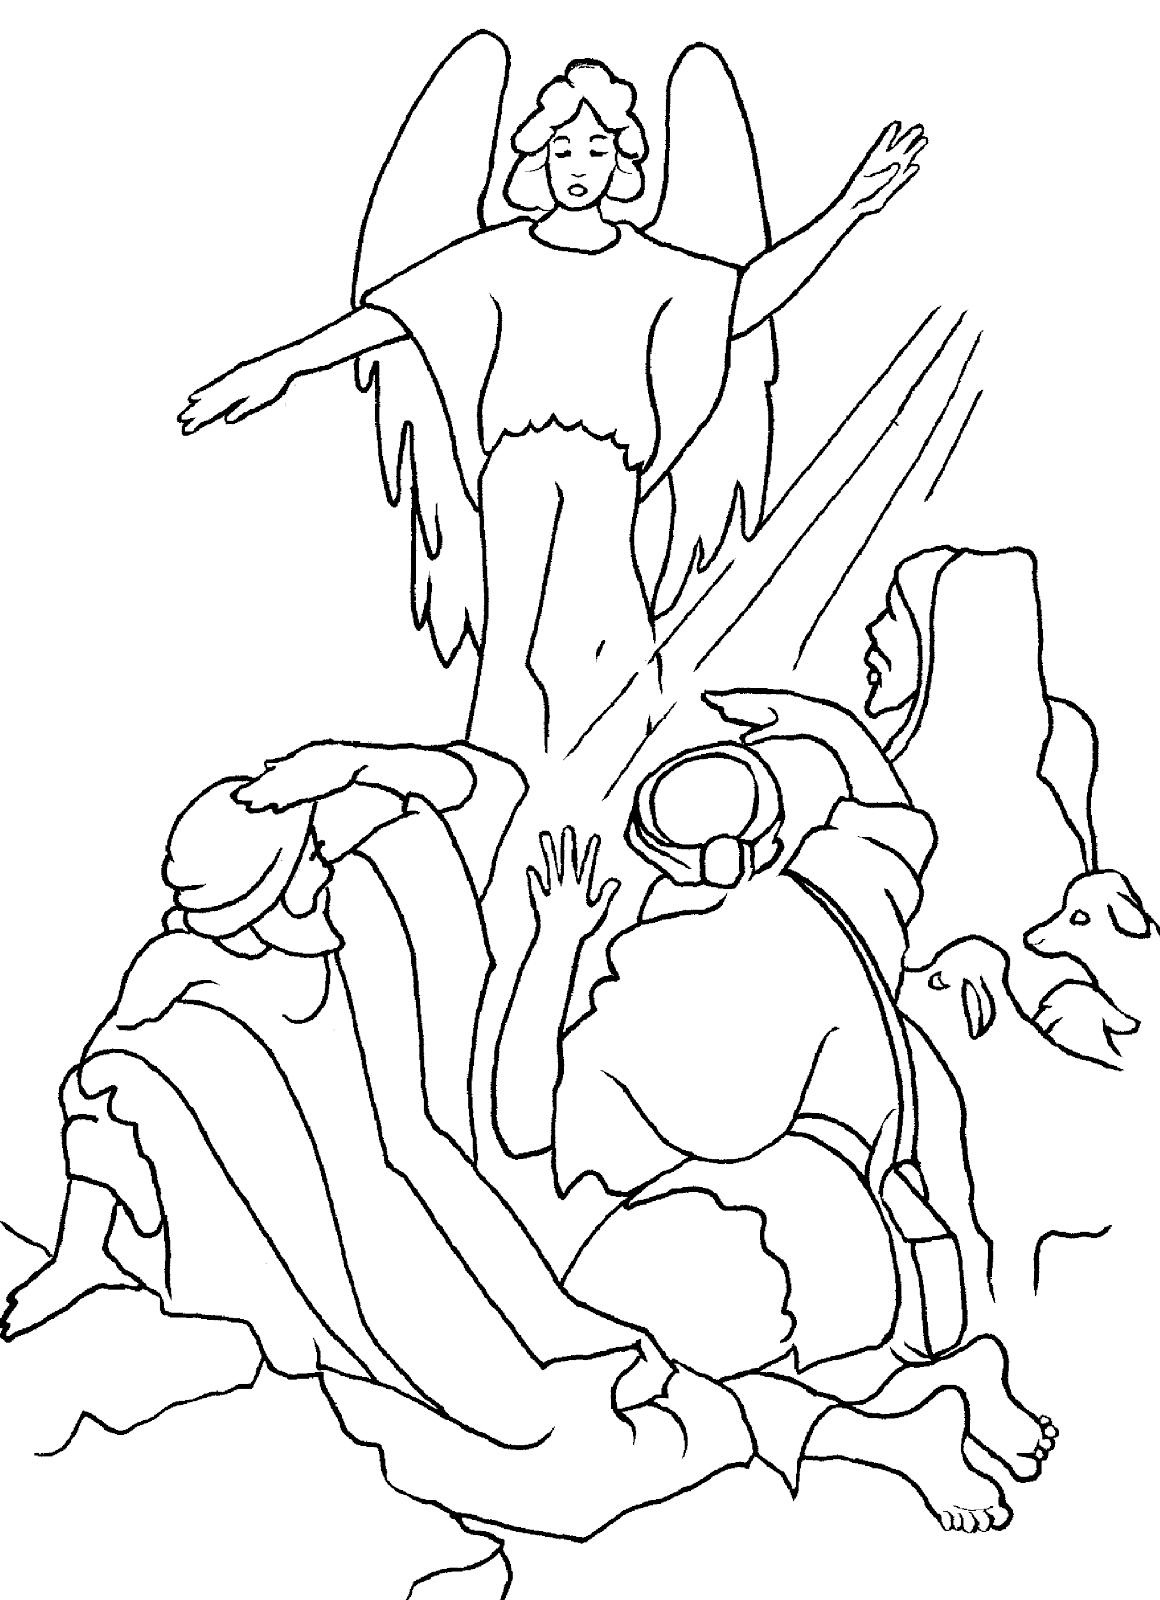 Good Samaritan Coloring Pages For